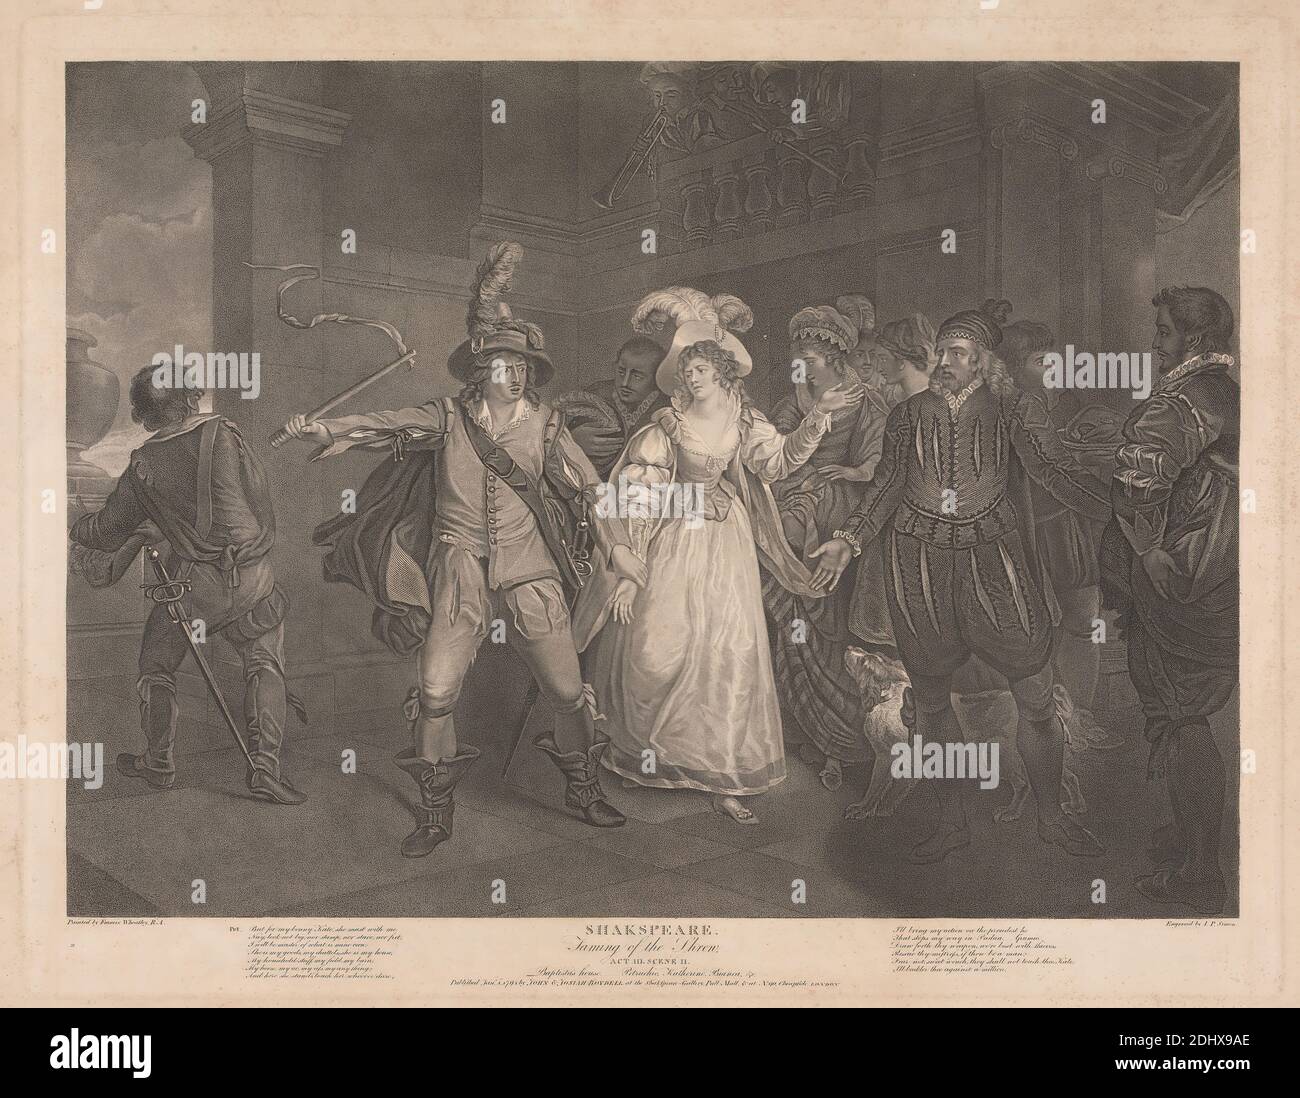 Taming Of The Shrew, Act III, Scene II, Peter Simon, 1750–1810, after Francis Wheatley, 1747–1801, British, 1795, Engraving and stipple engraving on thick, moderately textured, beige, wove paper, Sheet: 22 7/8 × 28 13/16 inches (58.1 × 73.2 cm), Plate: 19 1/2 × 25 1/8 inches (49.5 × 63.8 cm), and Image: 17 1/8 × 23 3/8 inches (43.5 × 59.4 cm Stock Photo